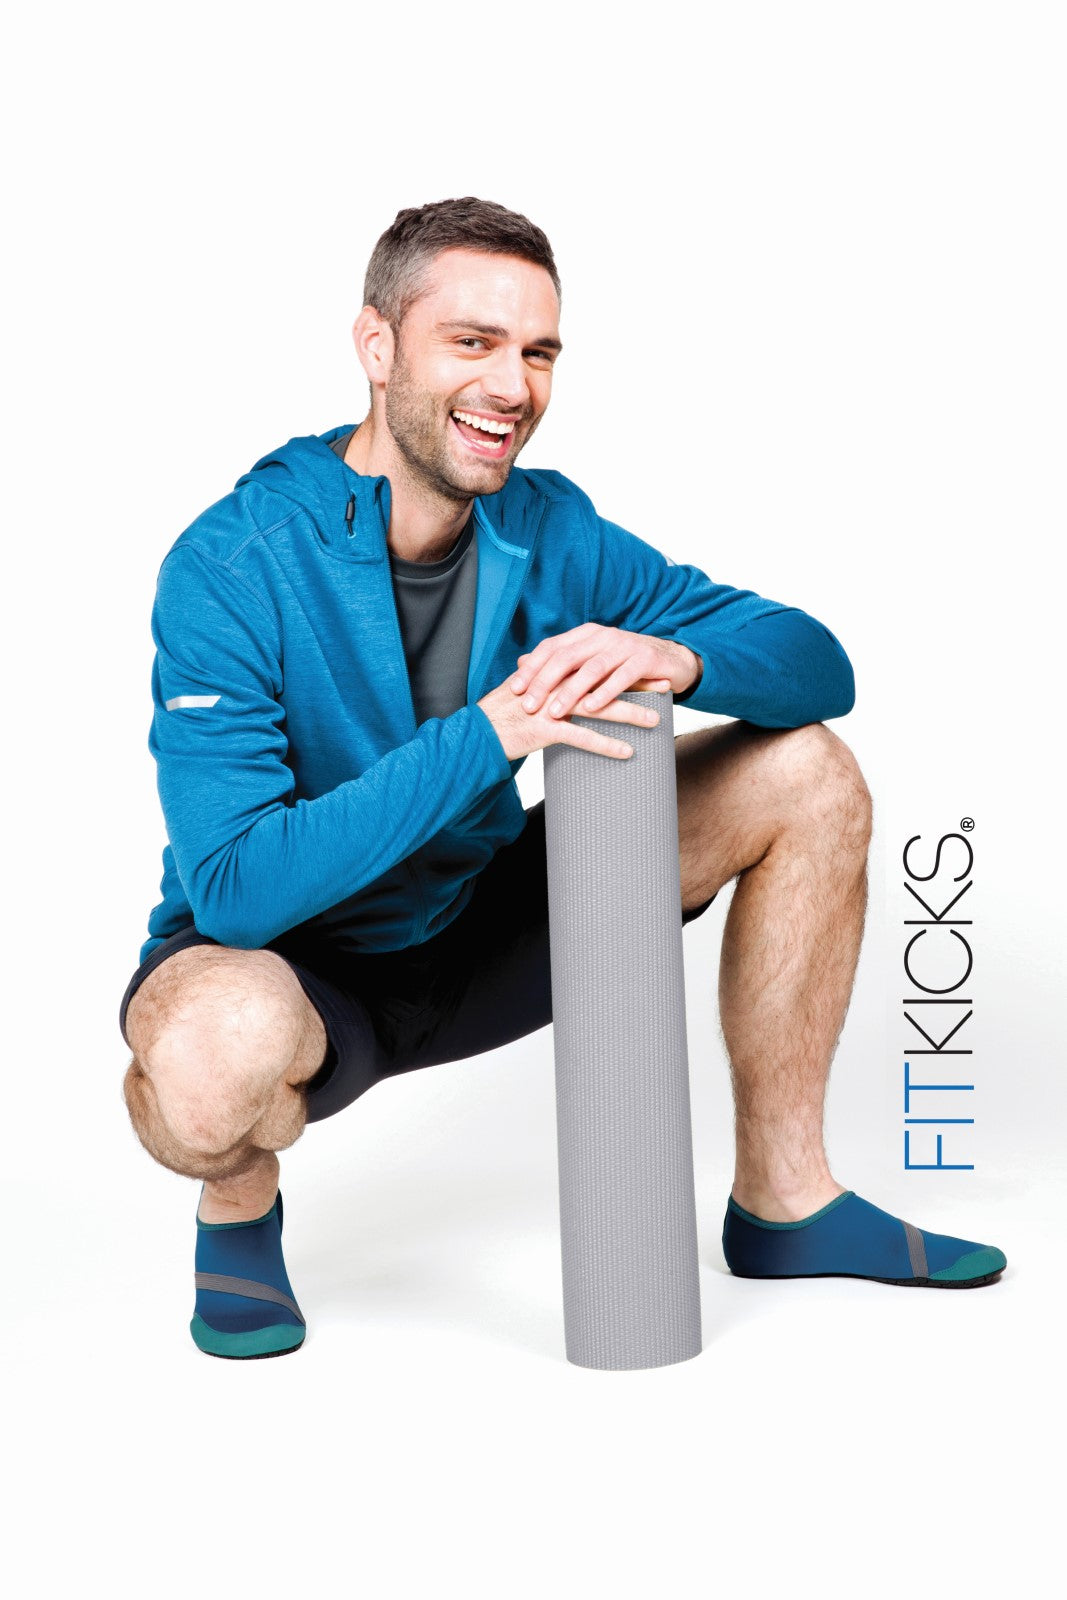 FITKICKS Men's Active Lifestyle Footwear